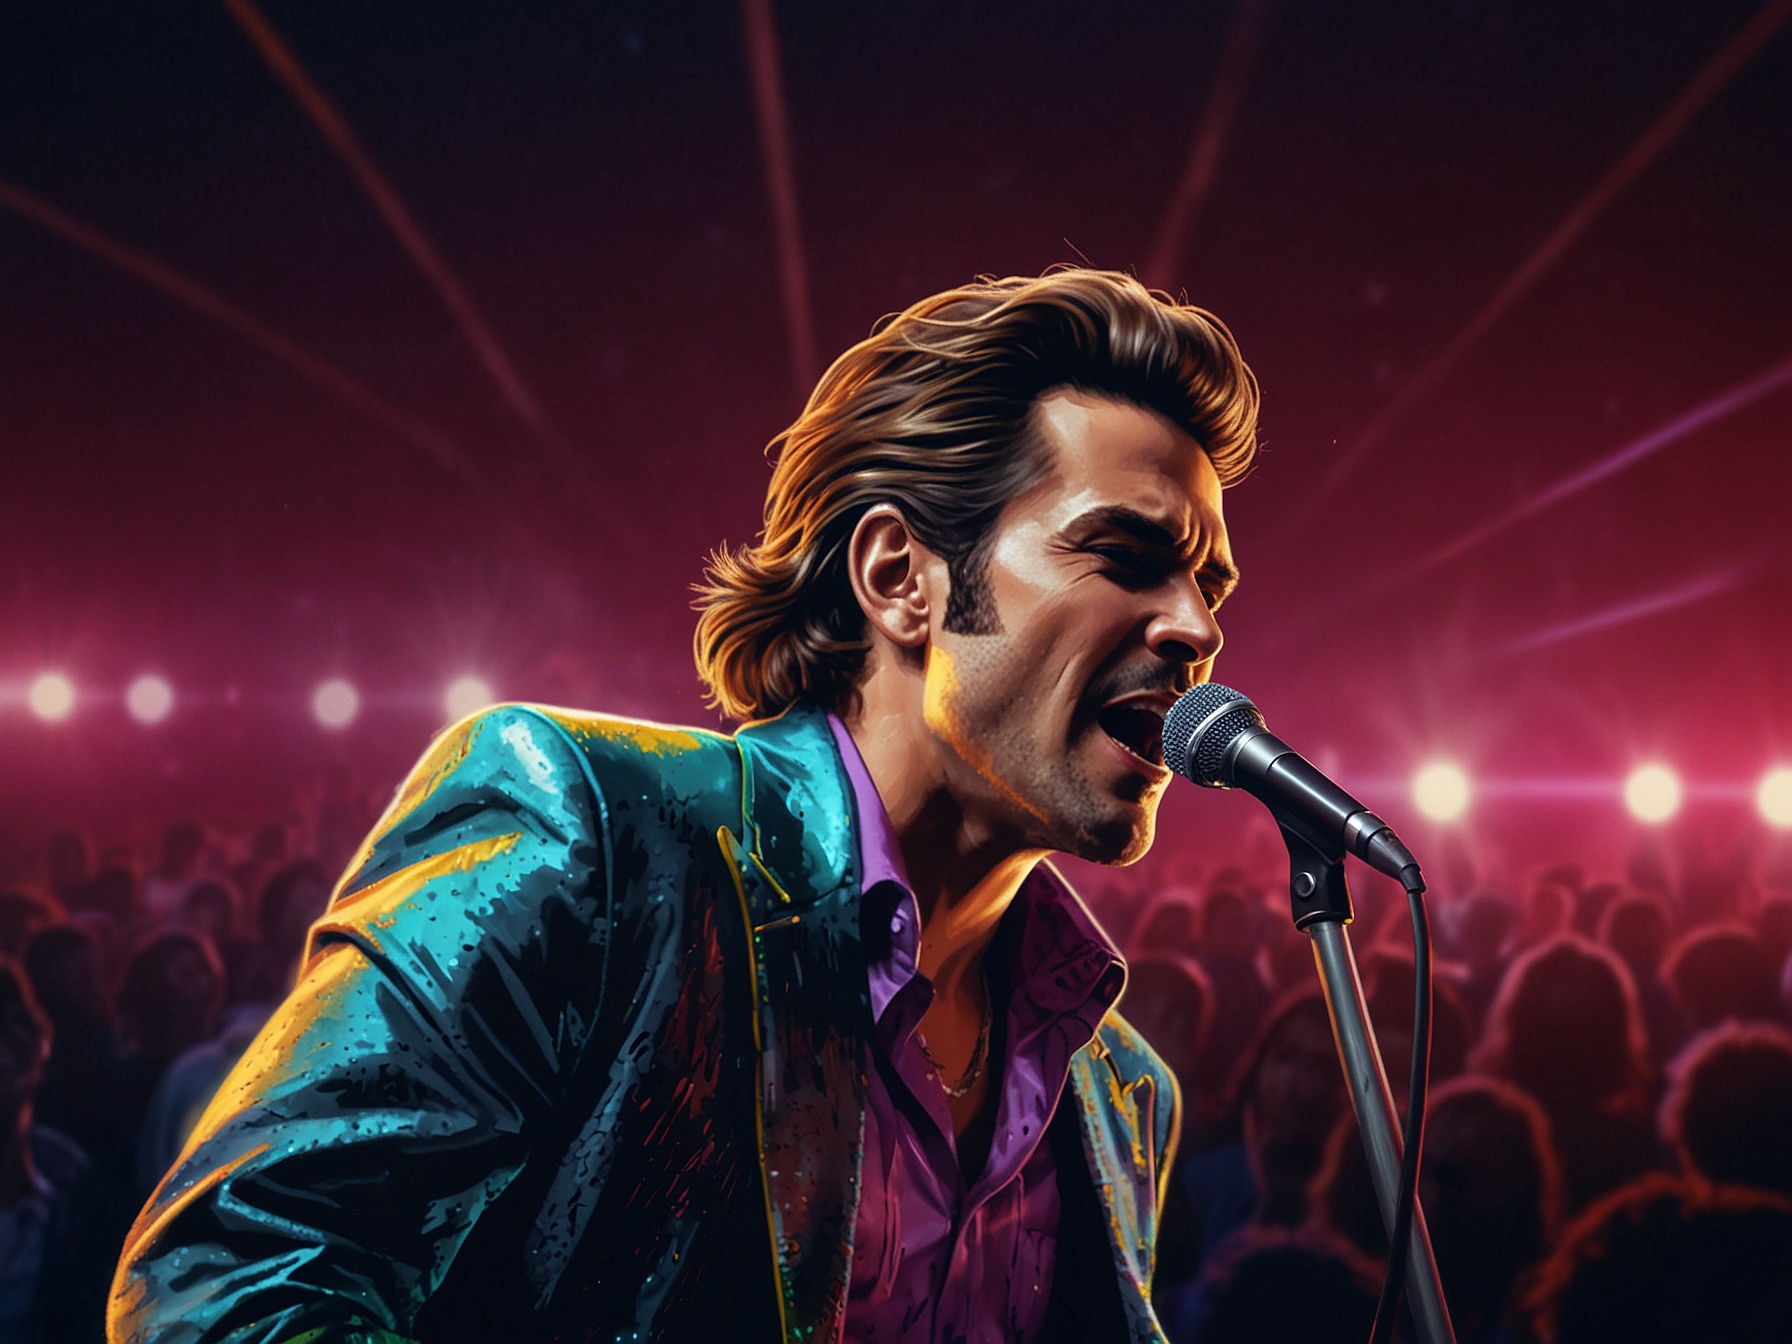 The music icon, dressed in a classic 80s style outfit, sings passionately into a microphone, with vibrant lights and special effects enhancing the exhilarating live performance.